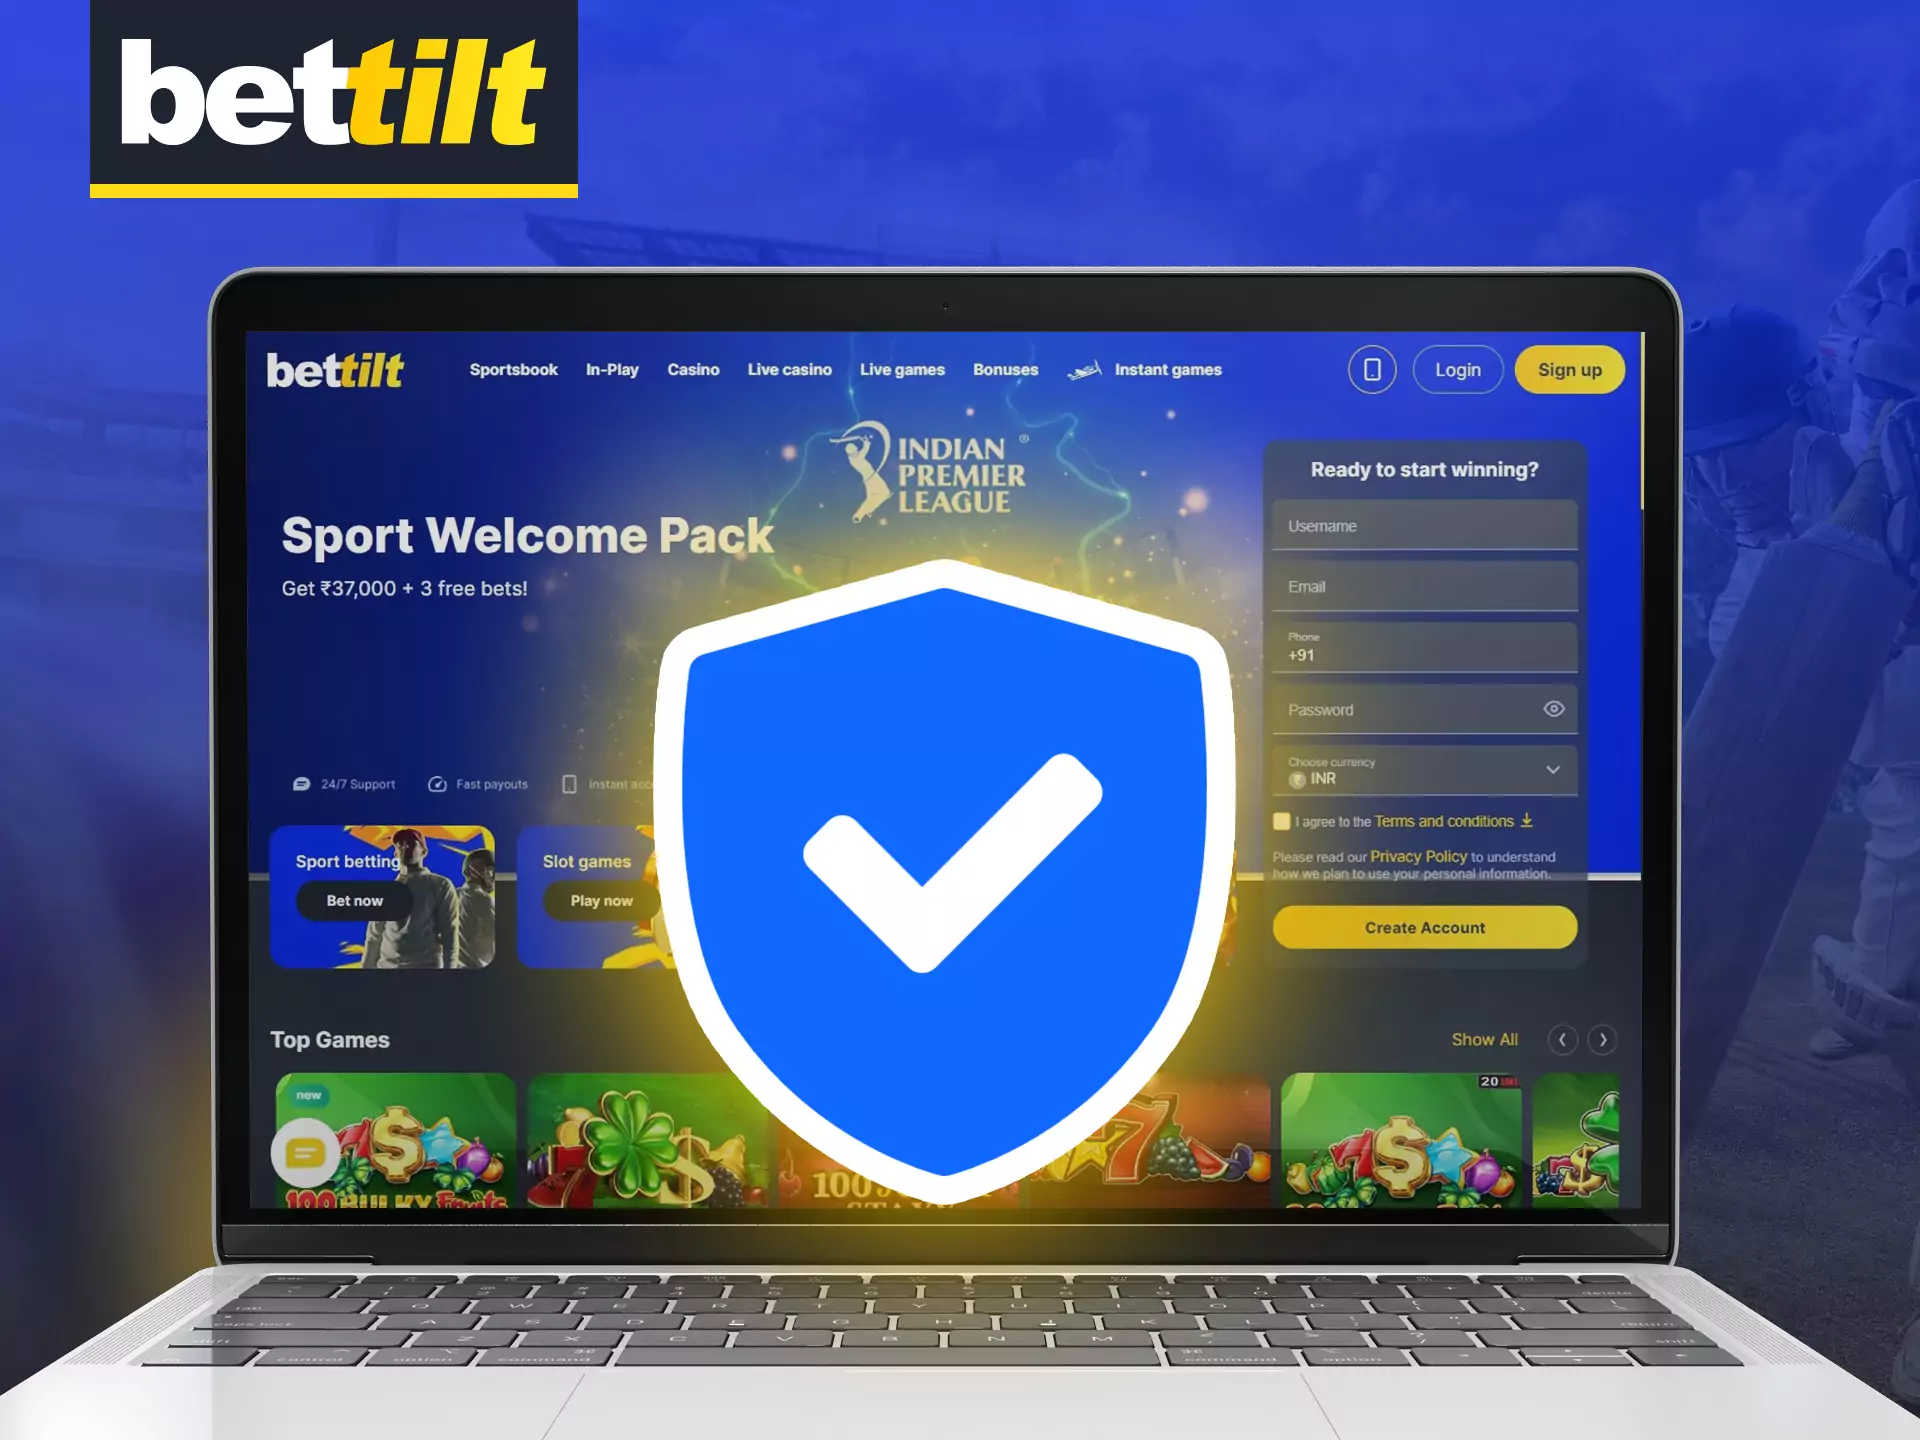 Bettilt is secure and safe for users.